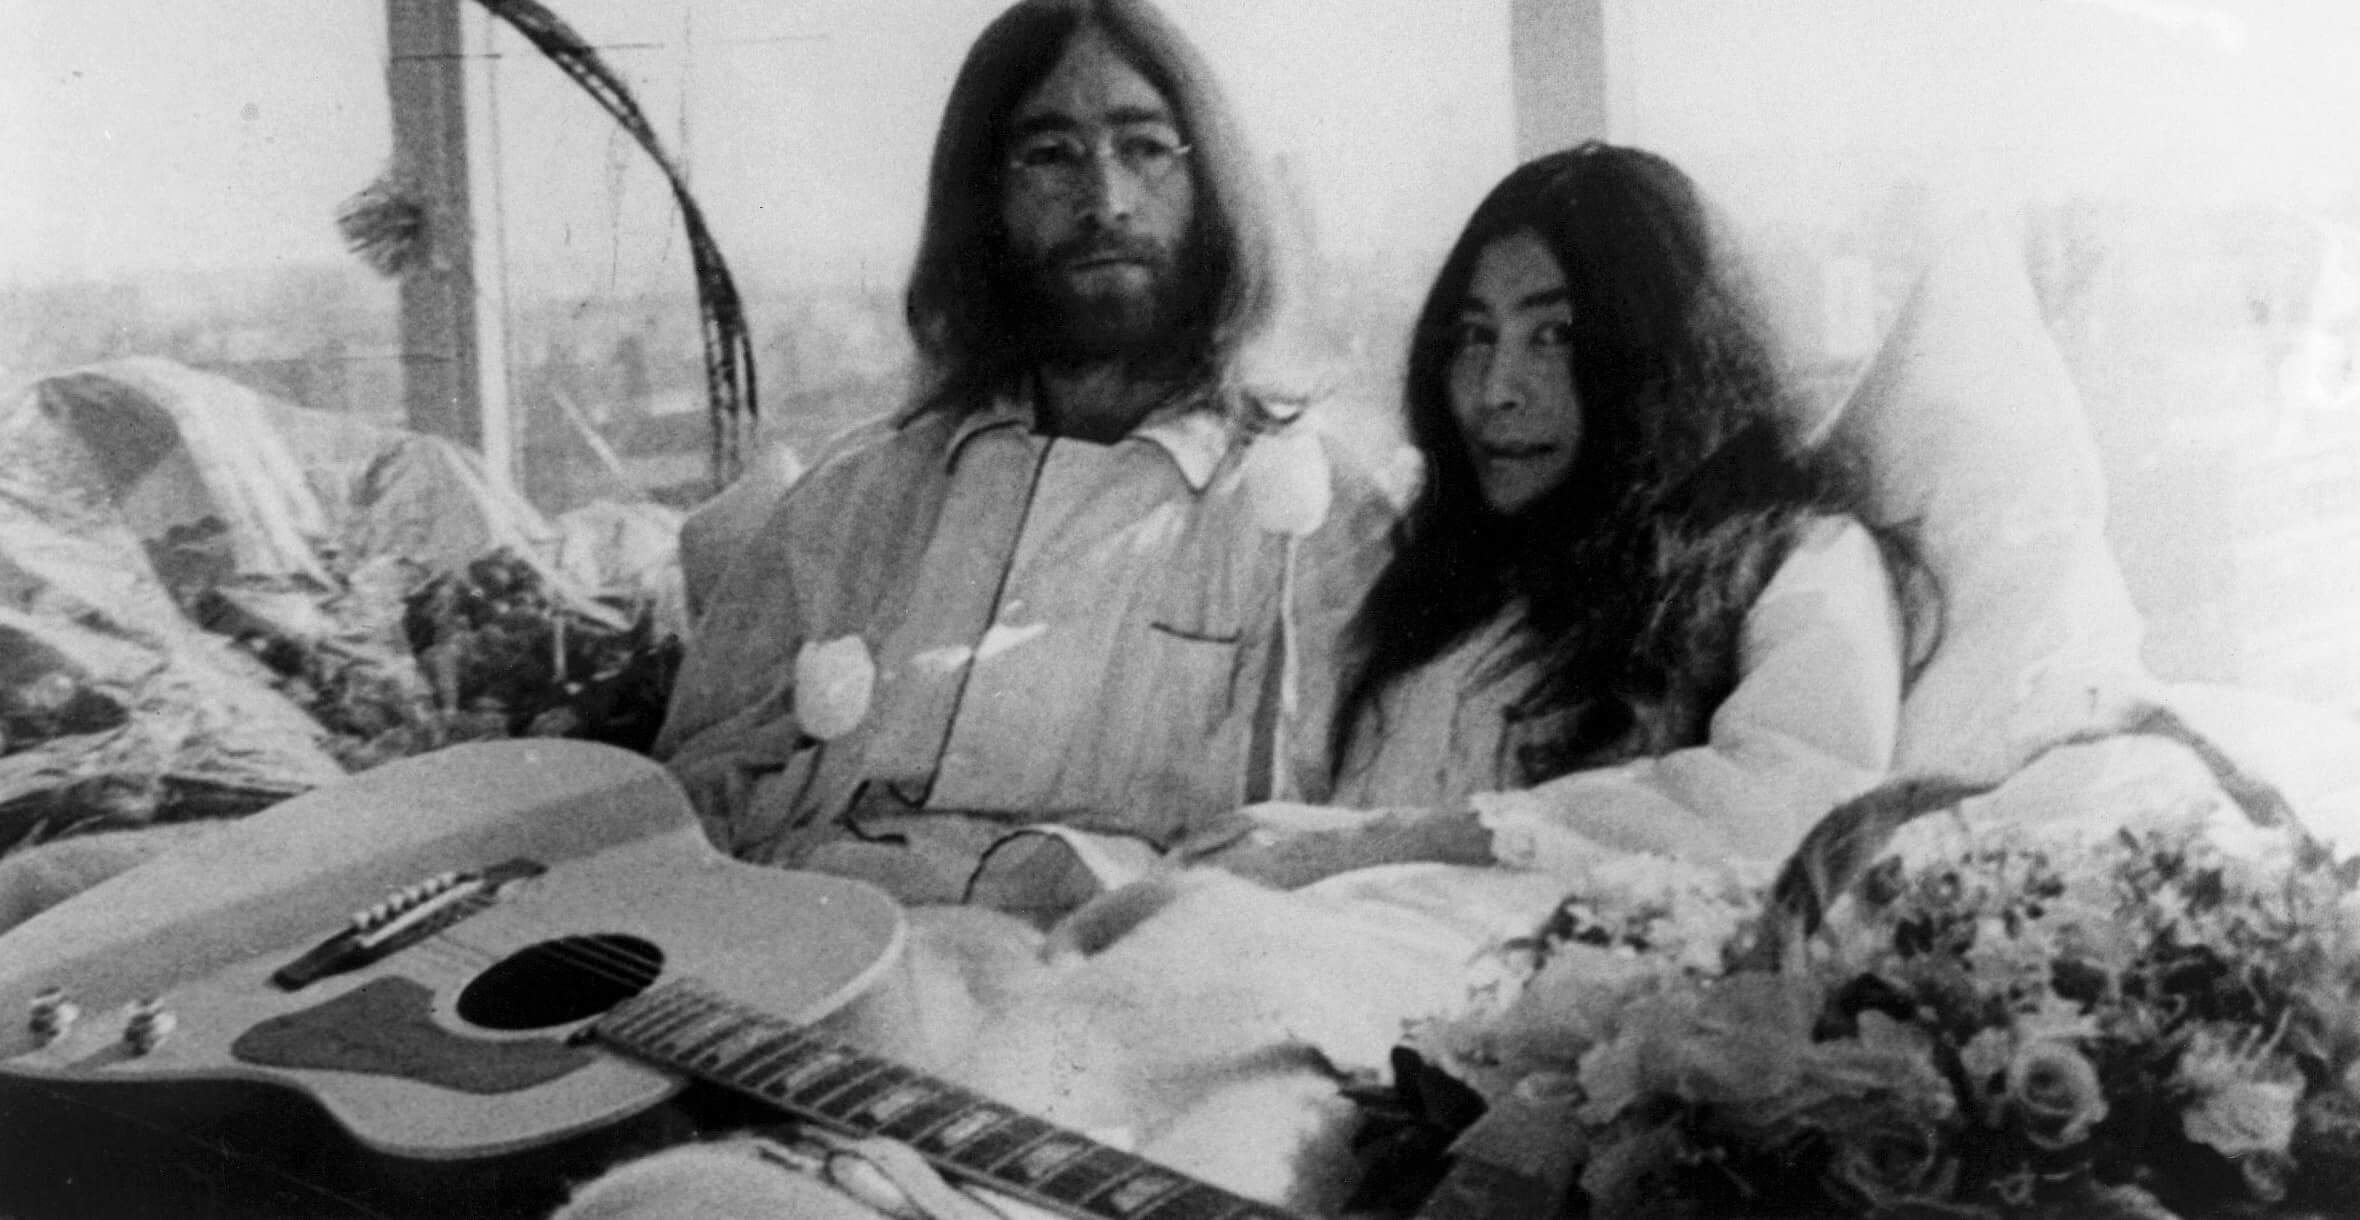 Reporters Thought 1 John Lennon Album Would Be About His Sexual Fantasies